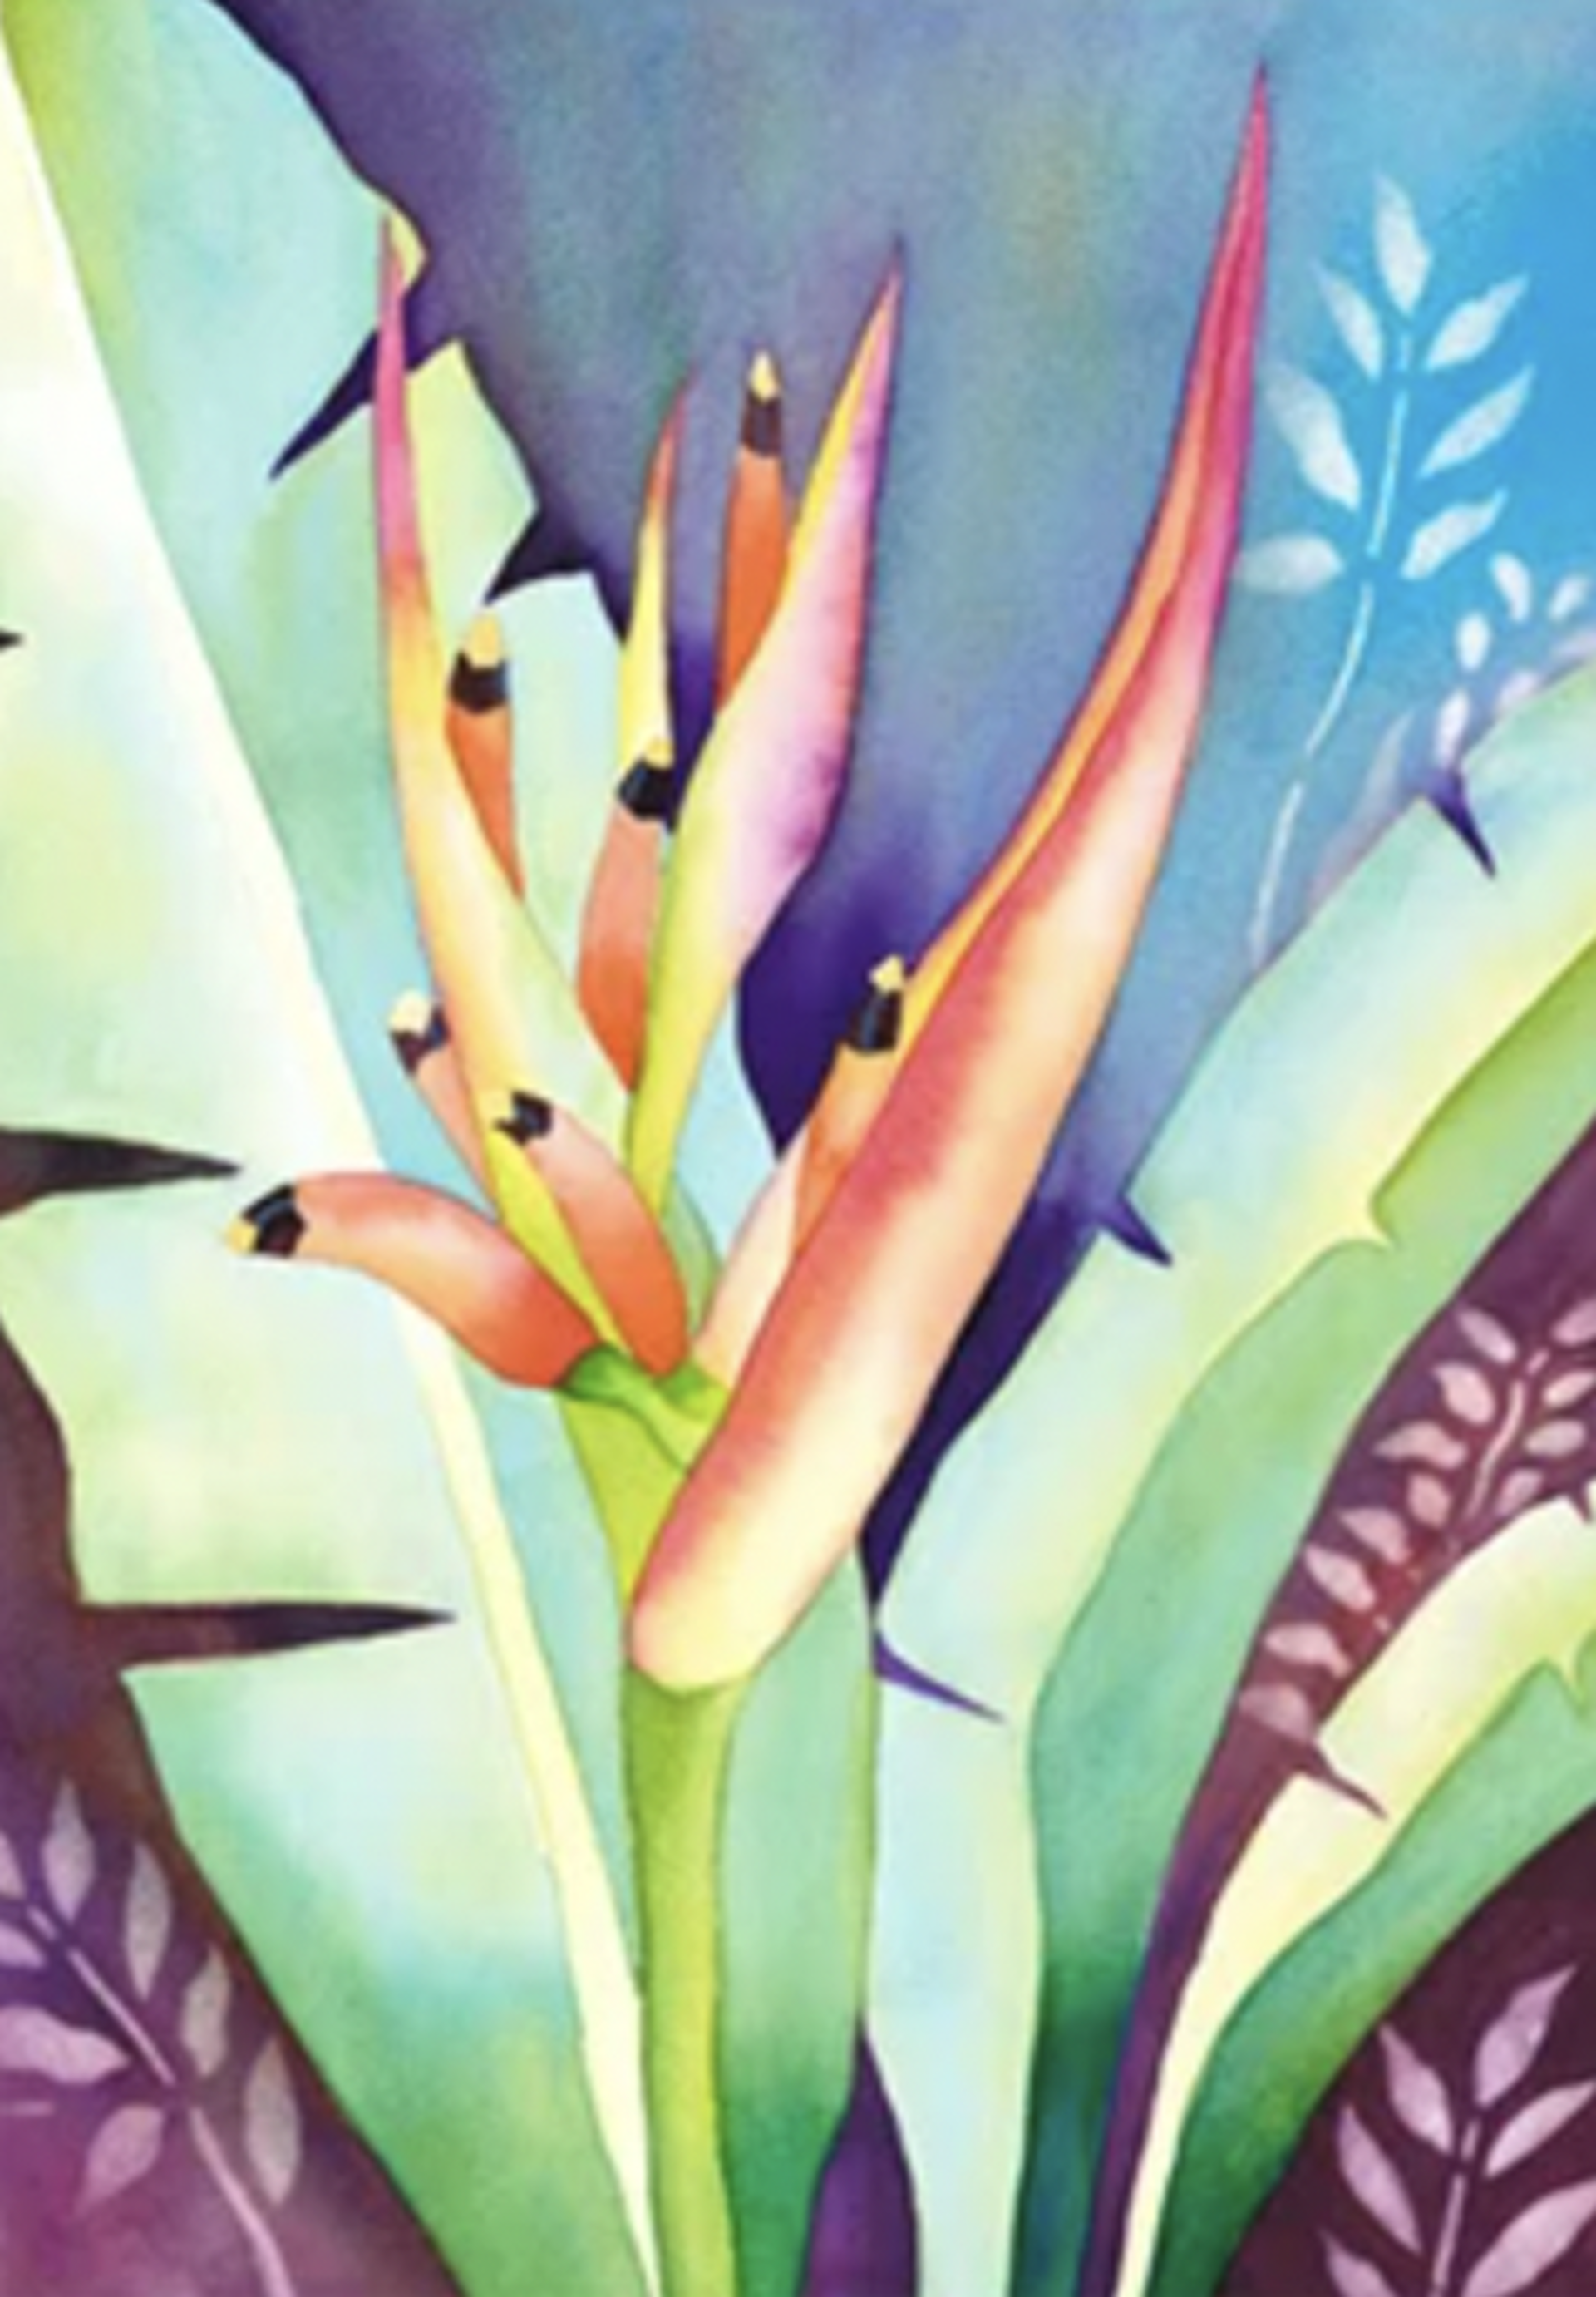 Sassy Heliconia by Jocelyn Cheng